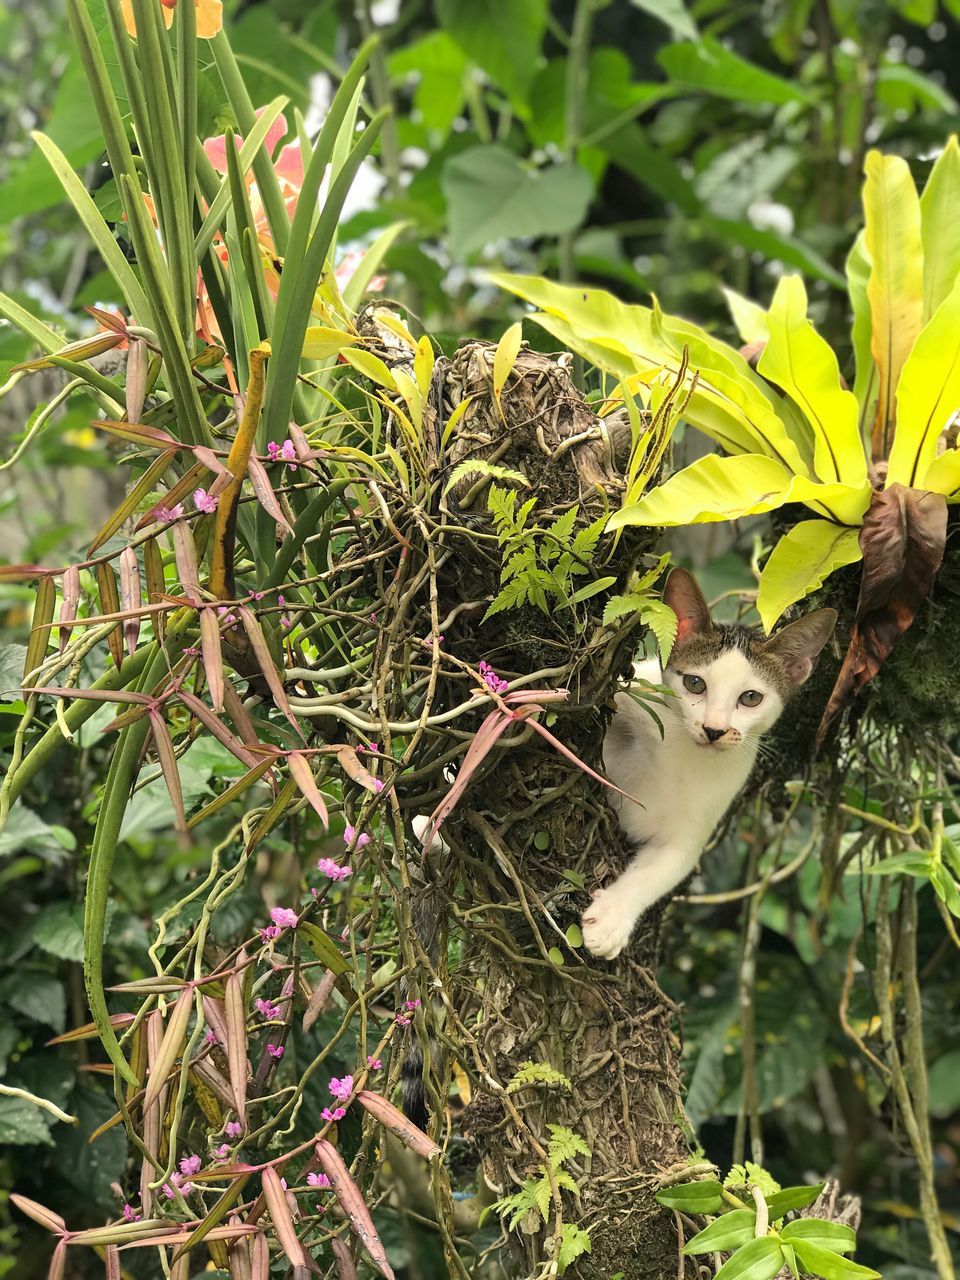 PORTRAIT OF CAT IN A PLANT